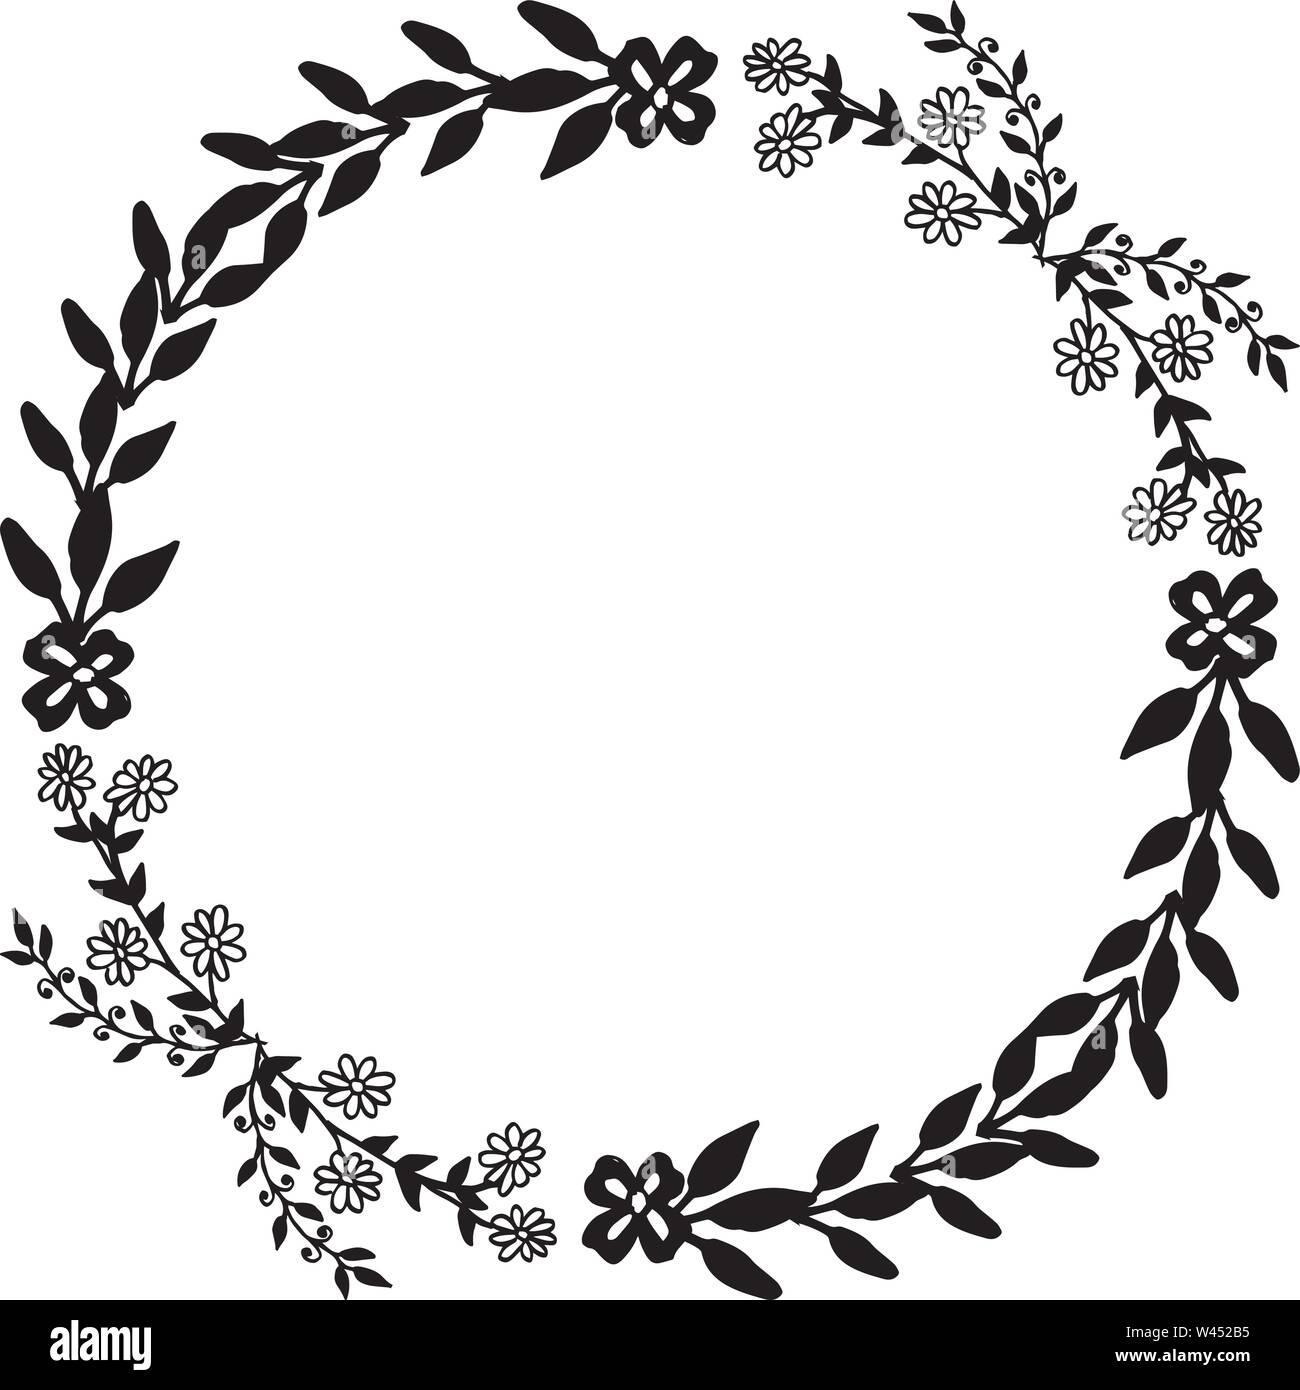 Black and white floral frame with style unique and elegant, for ...